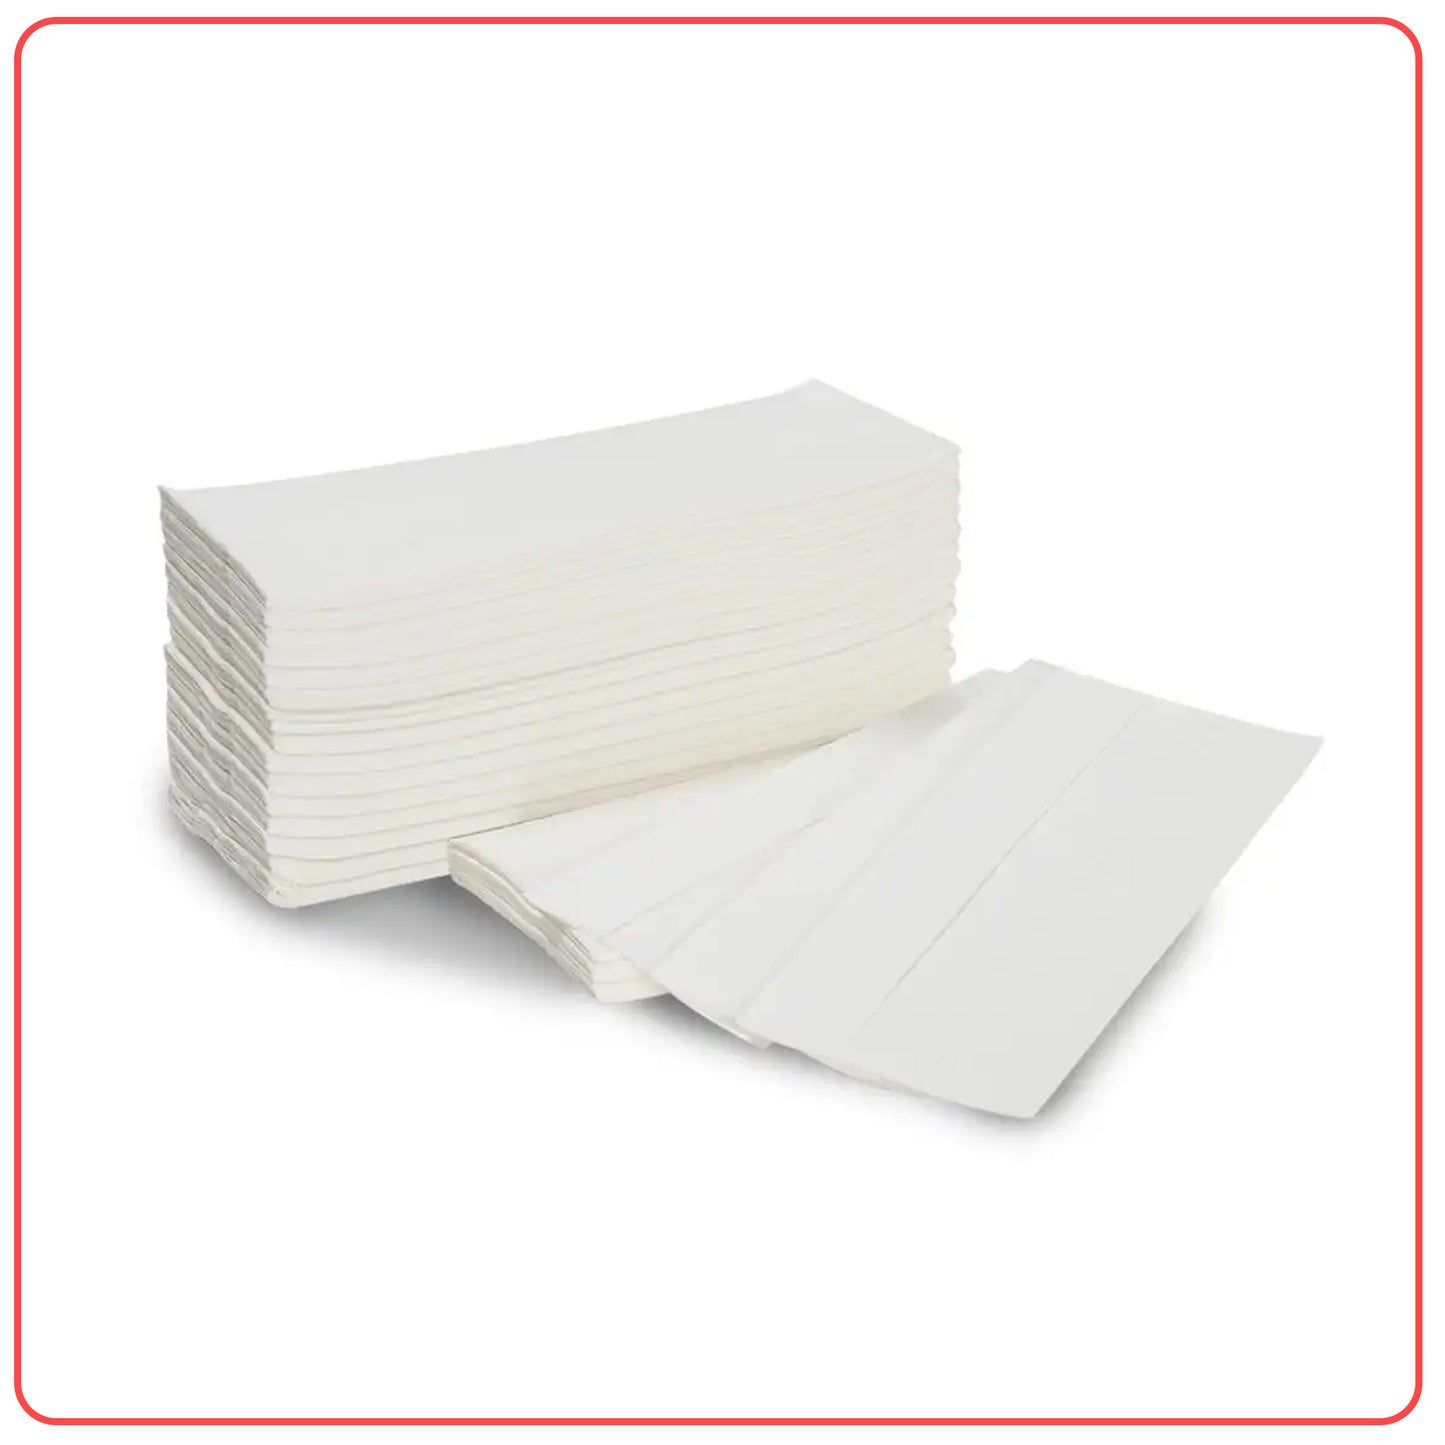 Folded Towel Paper Laminated 2Ply (10x200)